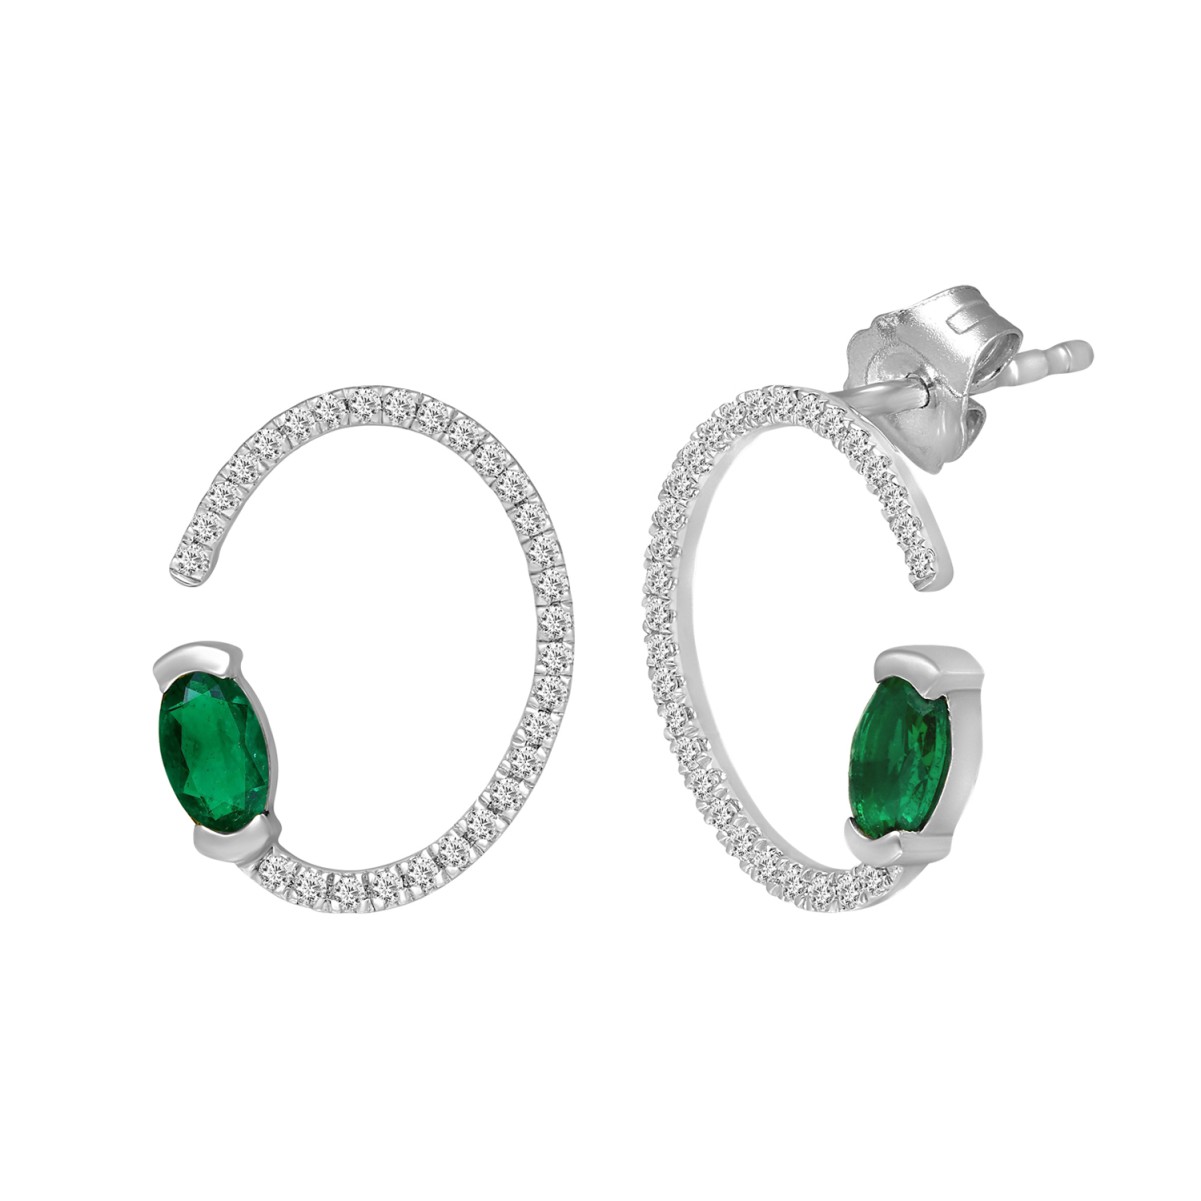 14K WHITE GOLD 3/4CT ROUND/OVAL DIAMOND LADIES EARRINGS(COLOR STONE OVAL GREEN EMERALD DIAMOND 1/2CT)